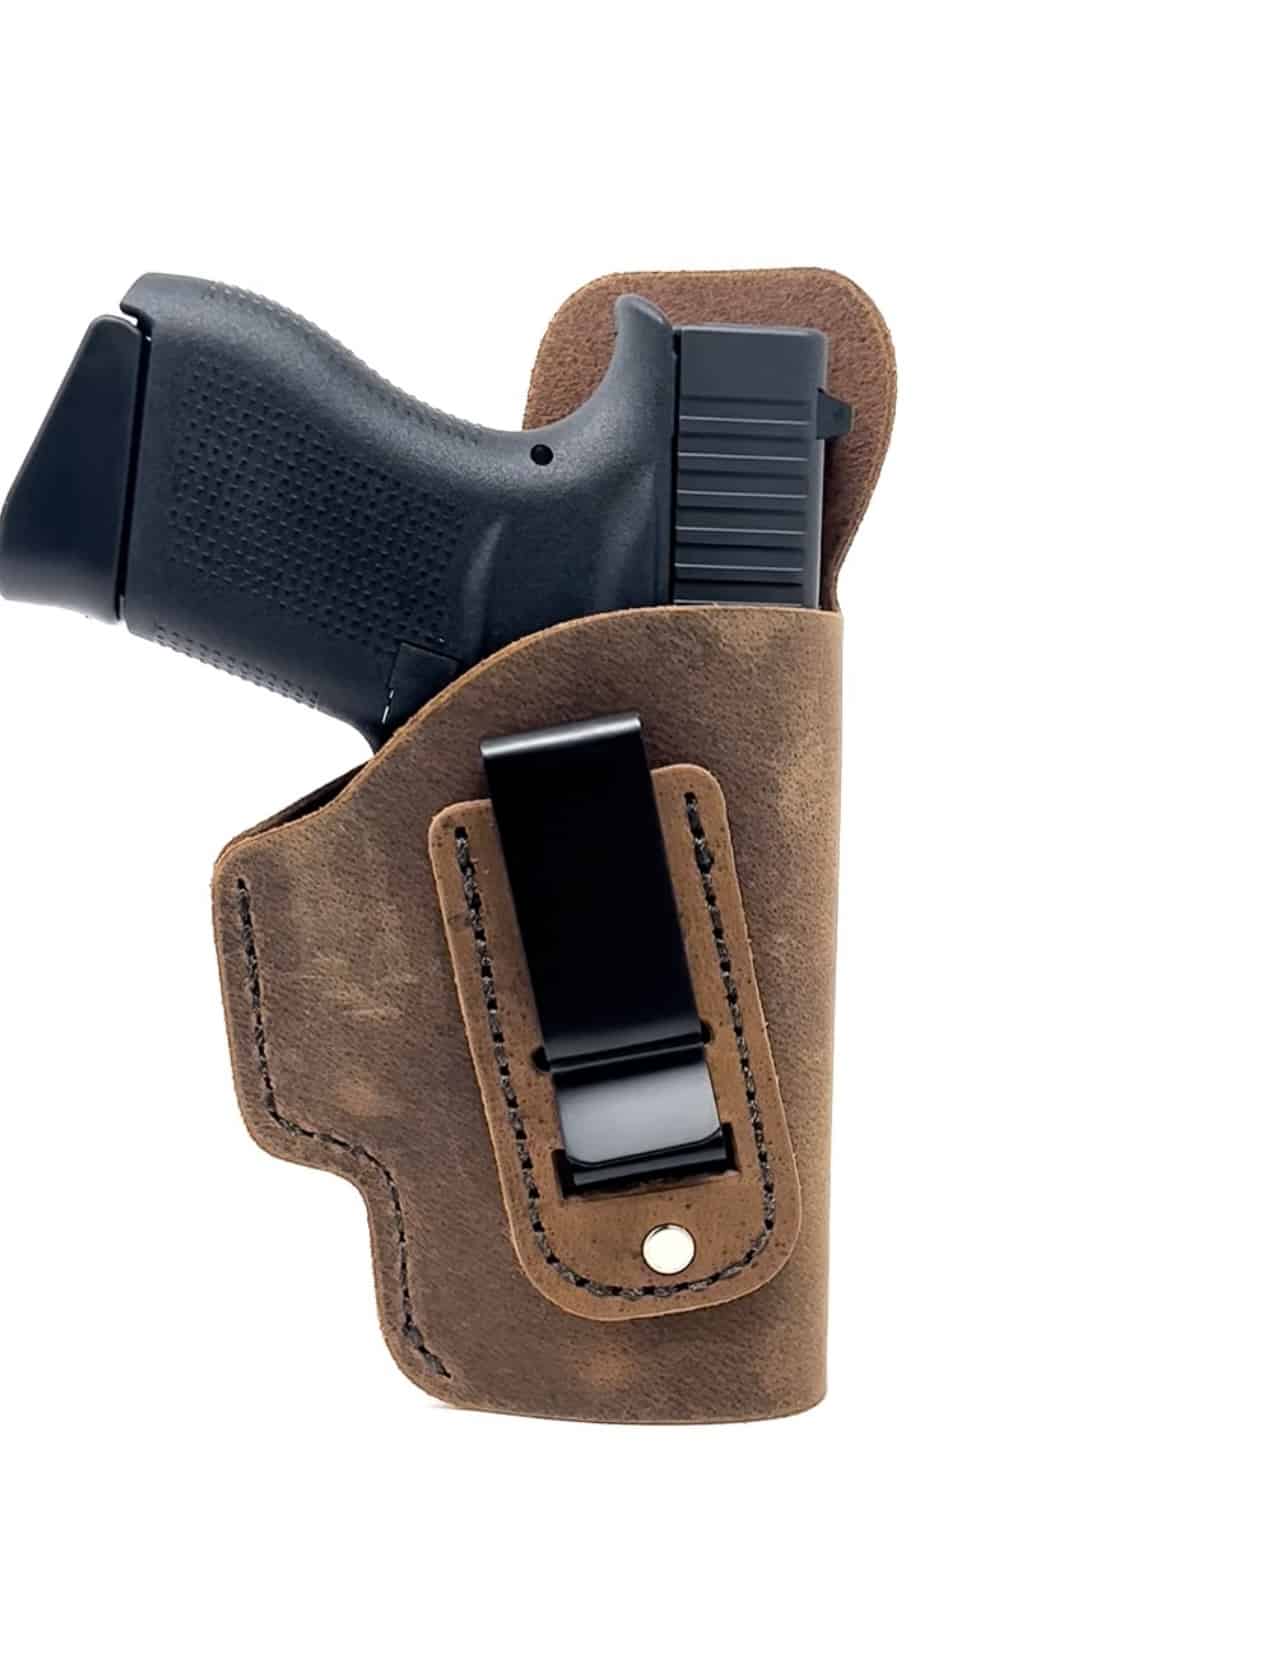 XTREME CARRY RH LH IWB Leather Gun Holster For S&W L-Frame 3" 